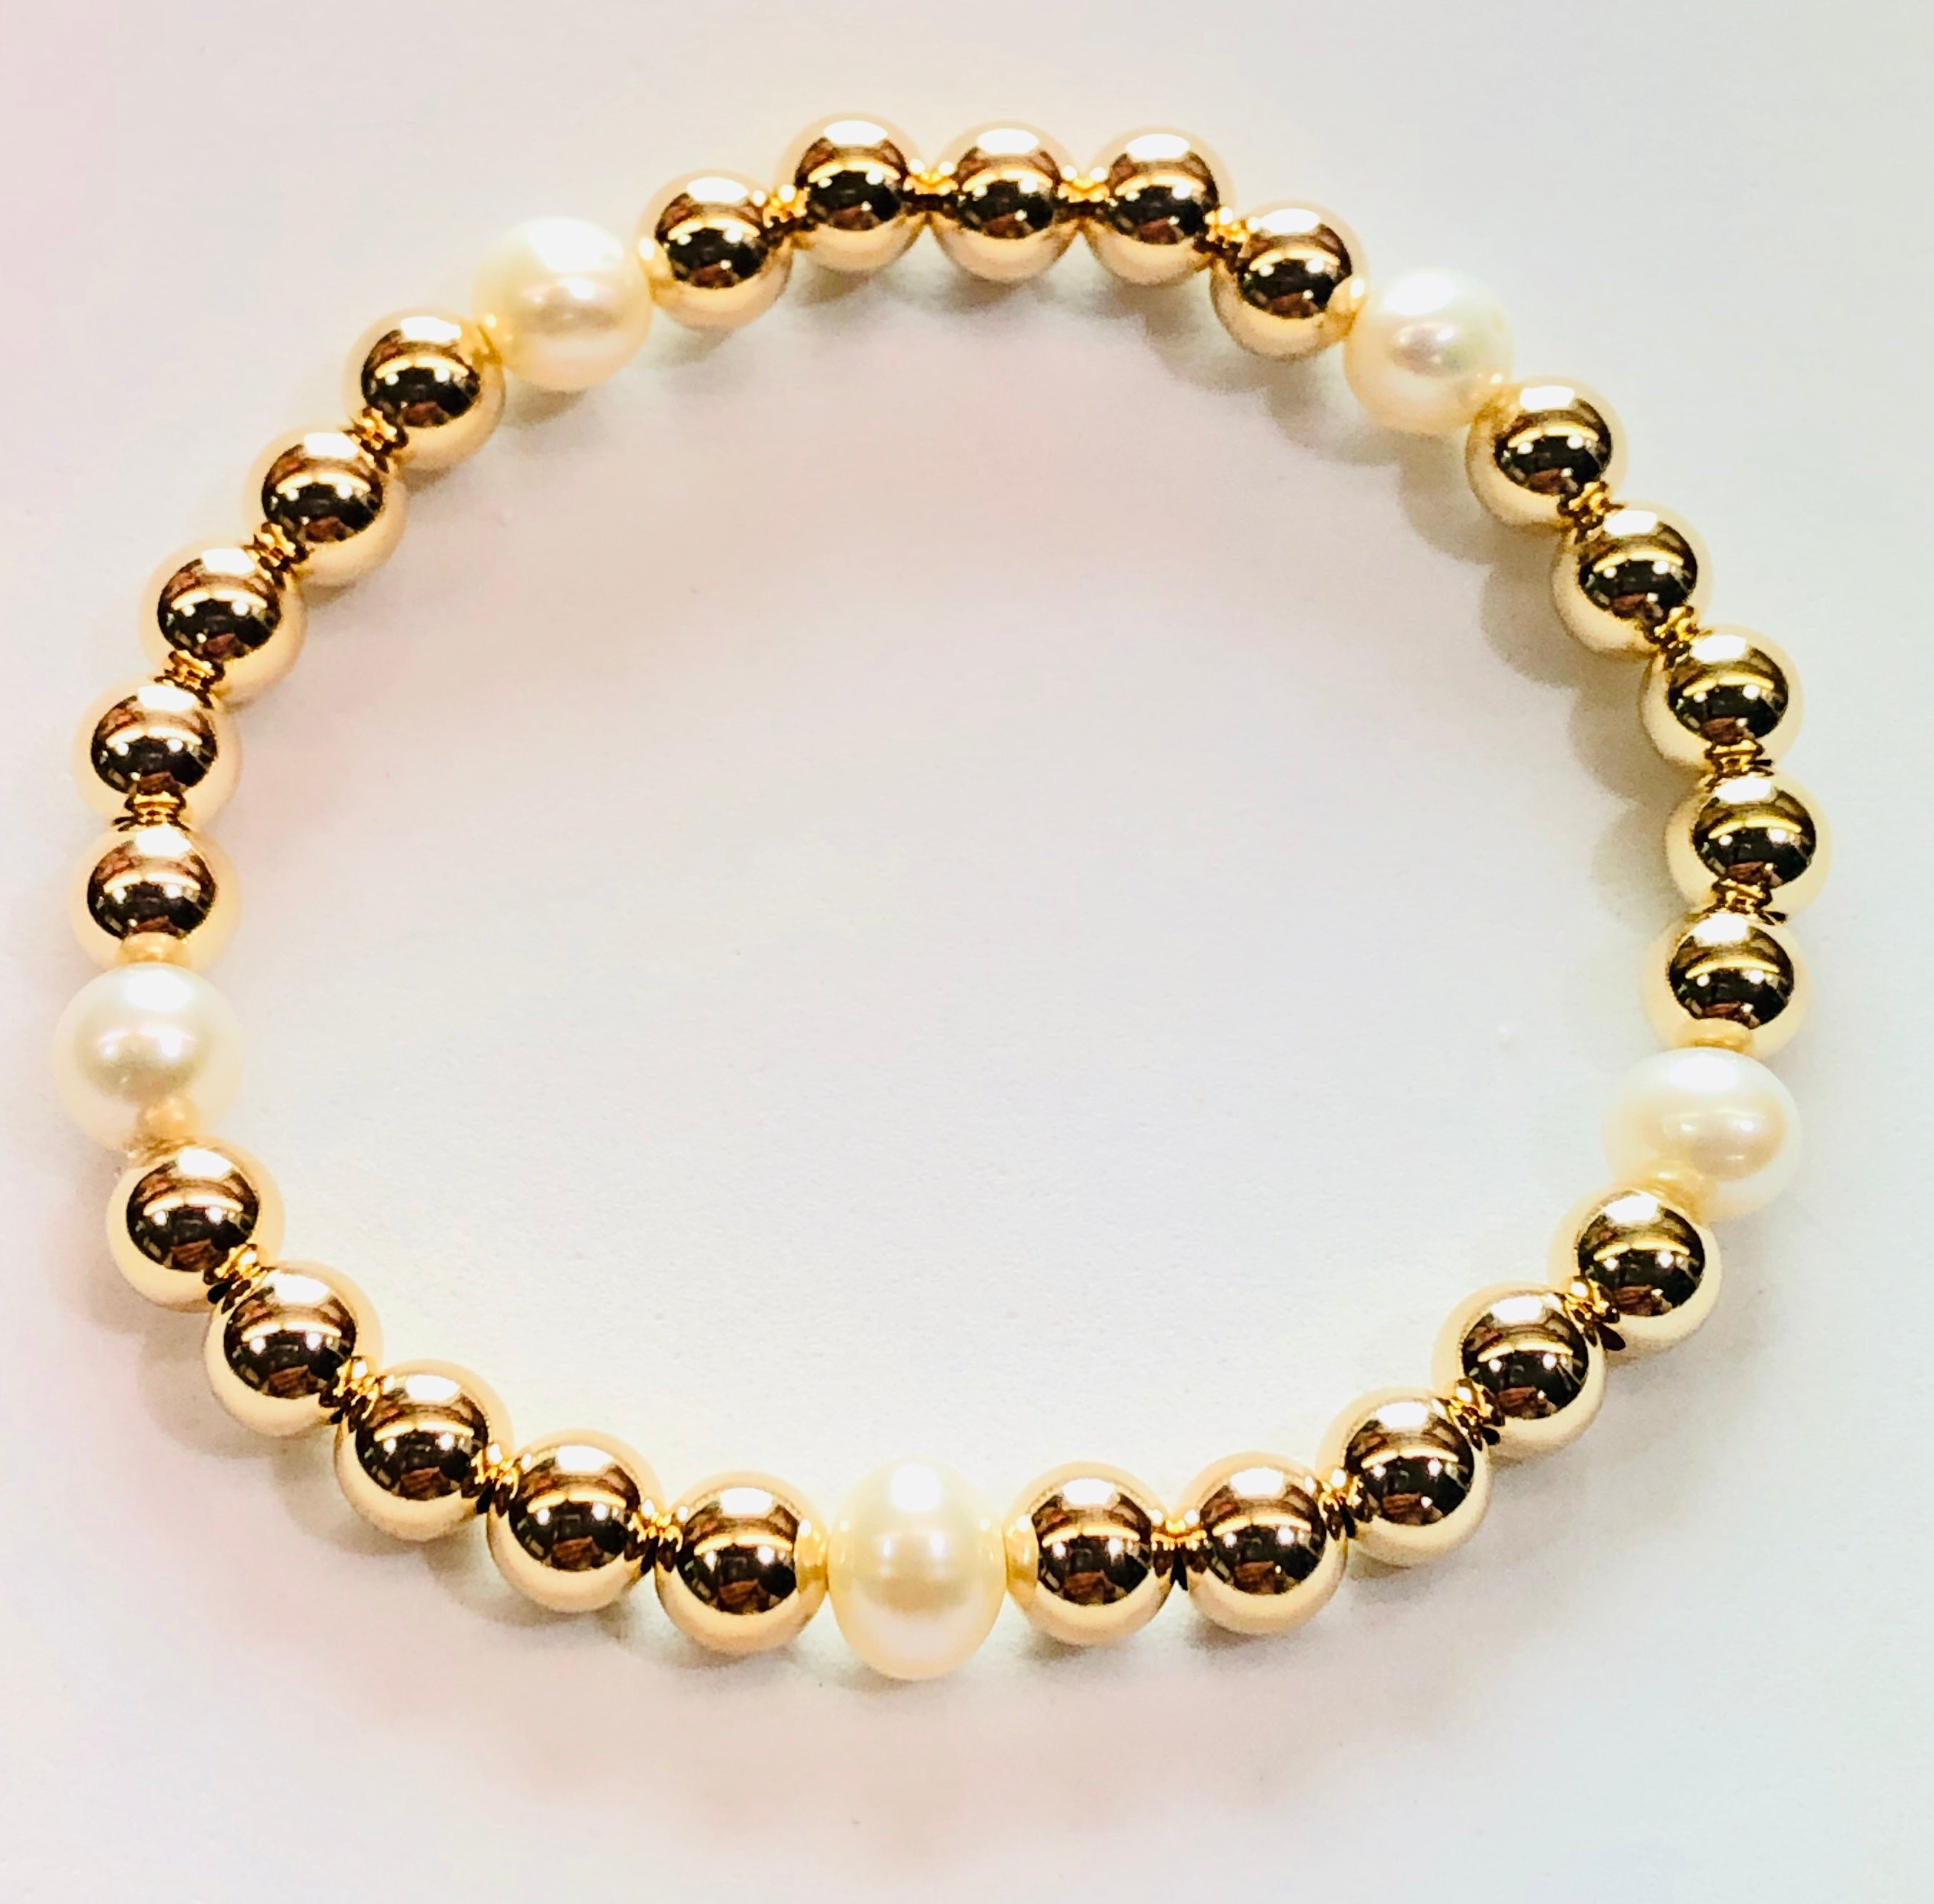 6mm 14kt Gold Filled Bead Bracelet with 5 6mm Fresh Water Pearls